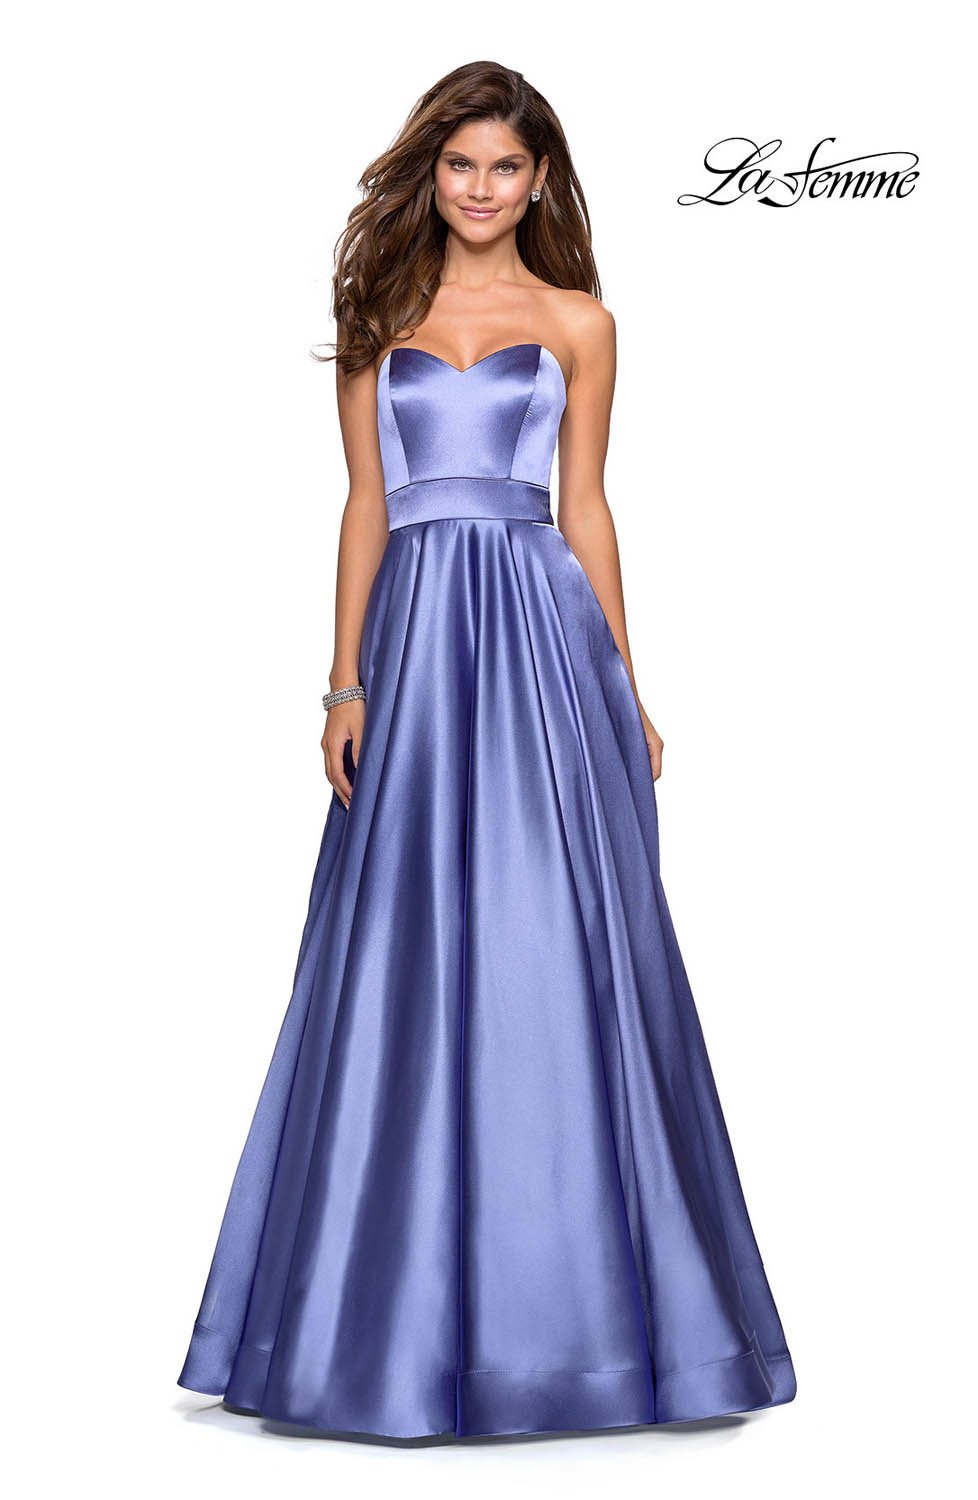 La Femme 27506 dress images in these colors: Dark Periwinkle, Rose Gold, Teal.